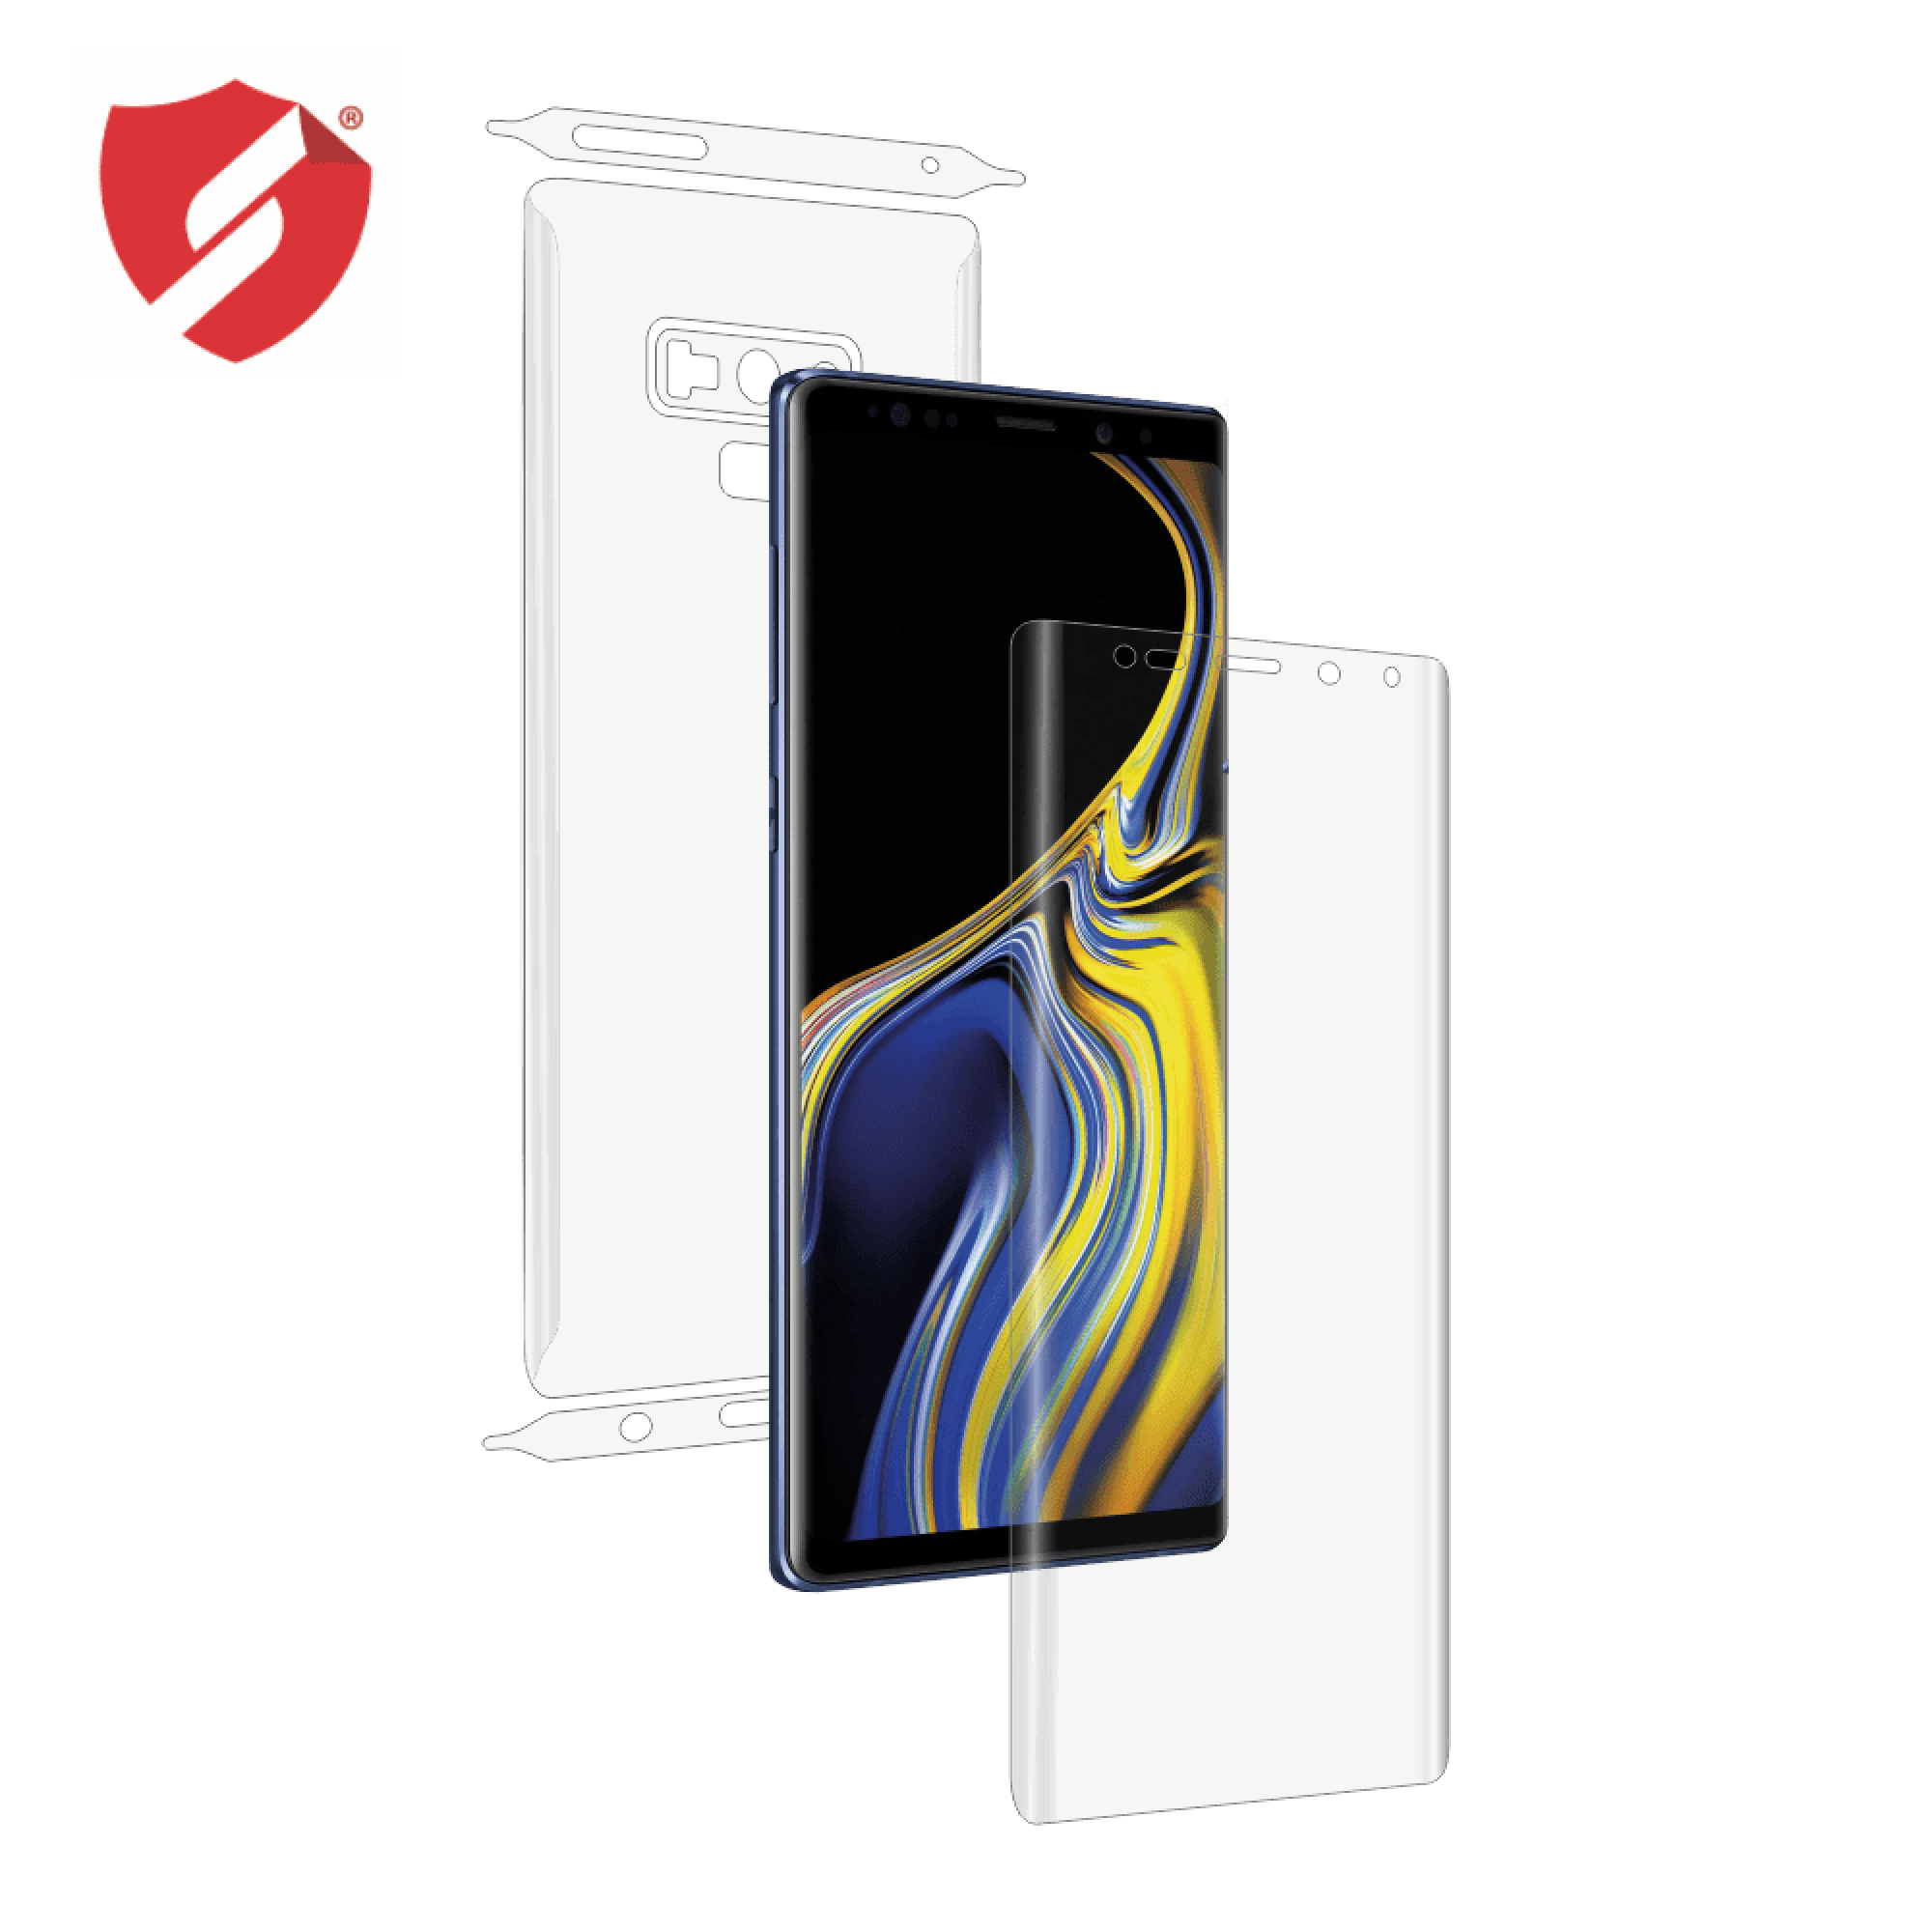 Folie de protectie Smart Protection Samsung Galaxy Note 9 compatibila cu carcasa Protective Standing Cover - fullbody - display + spate + laterale imagine